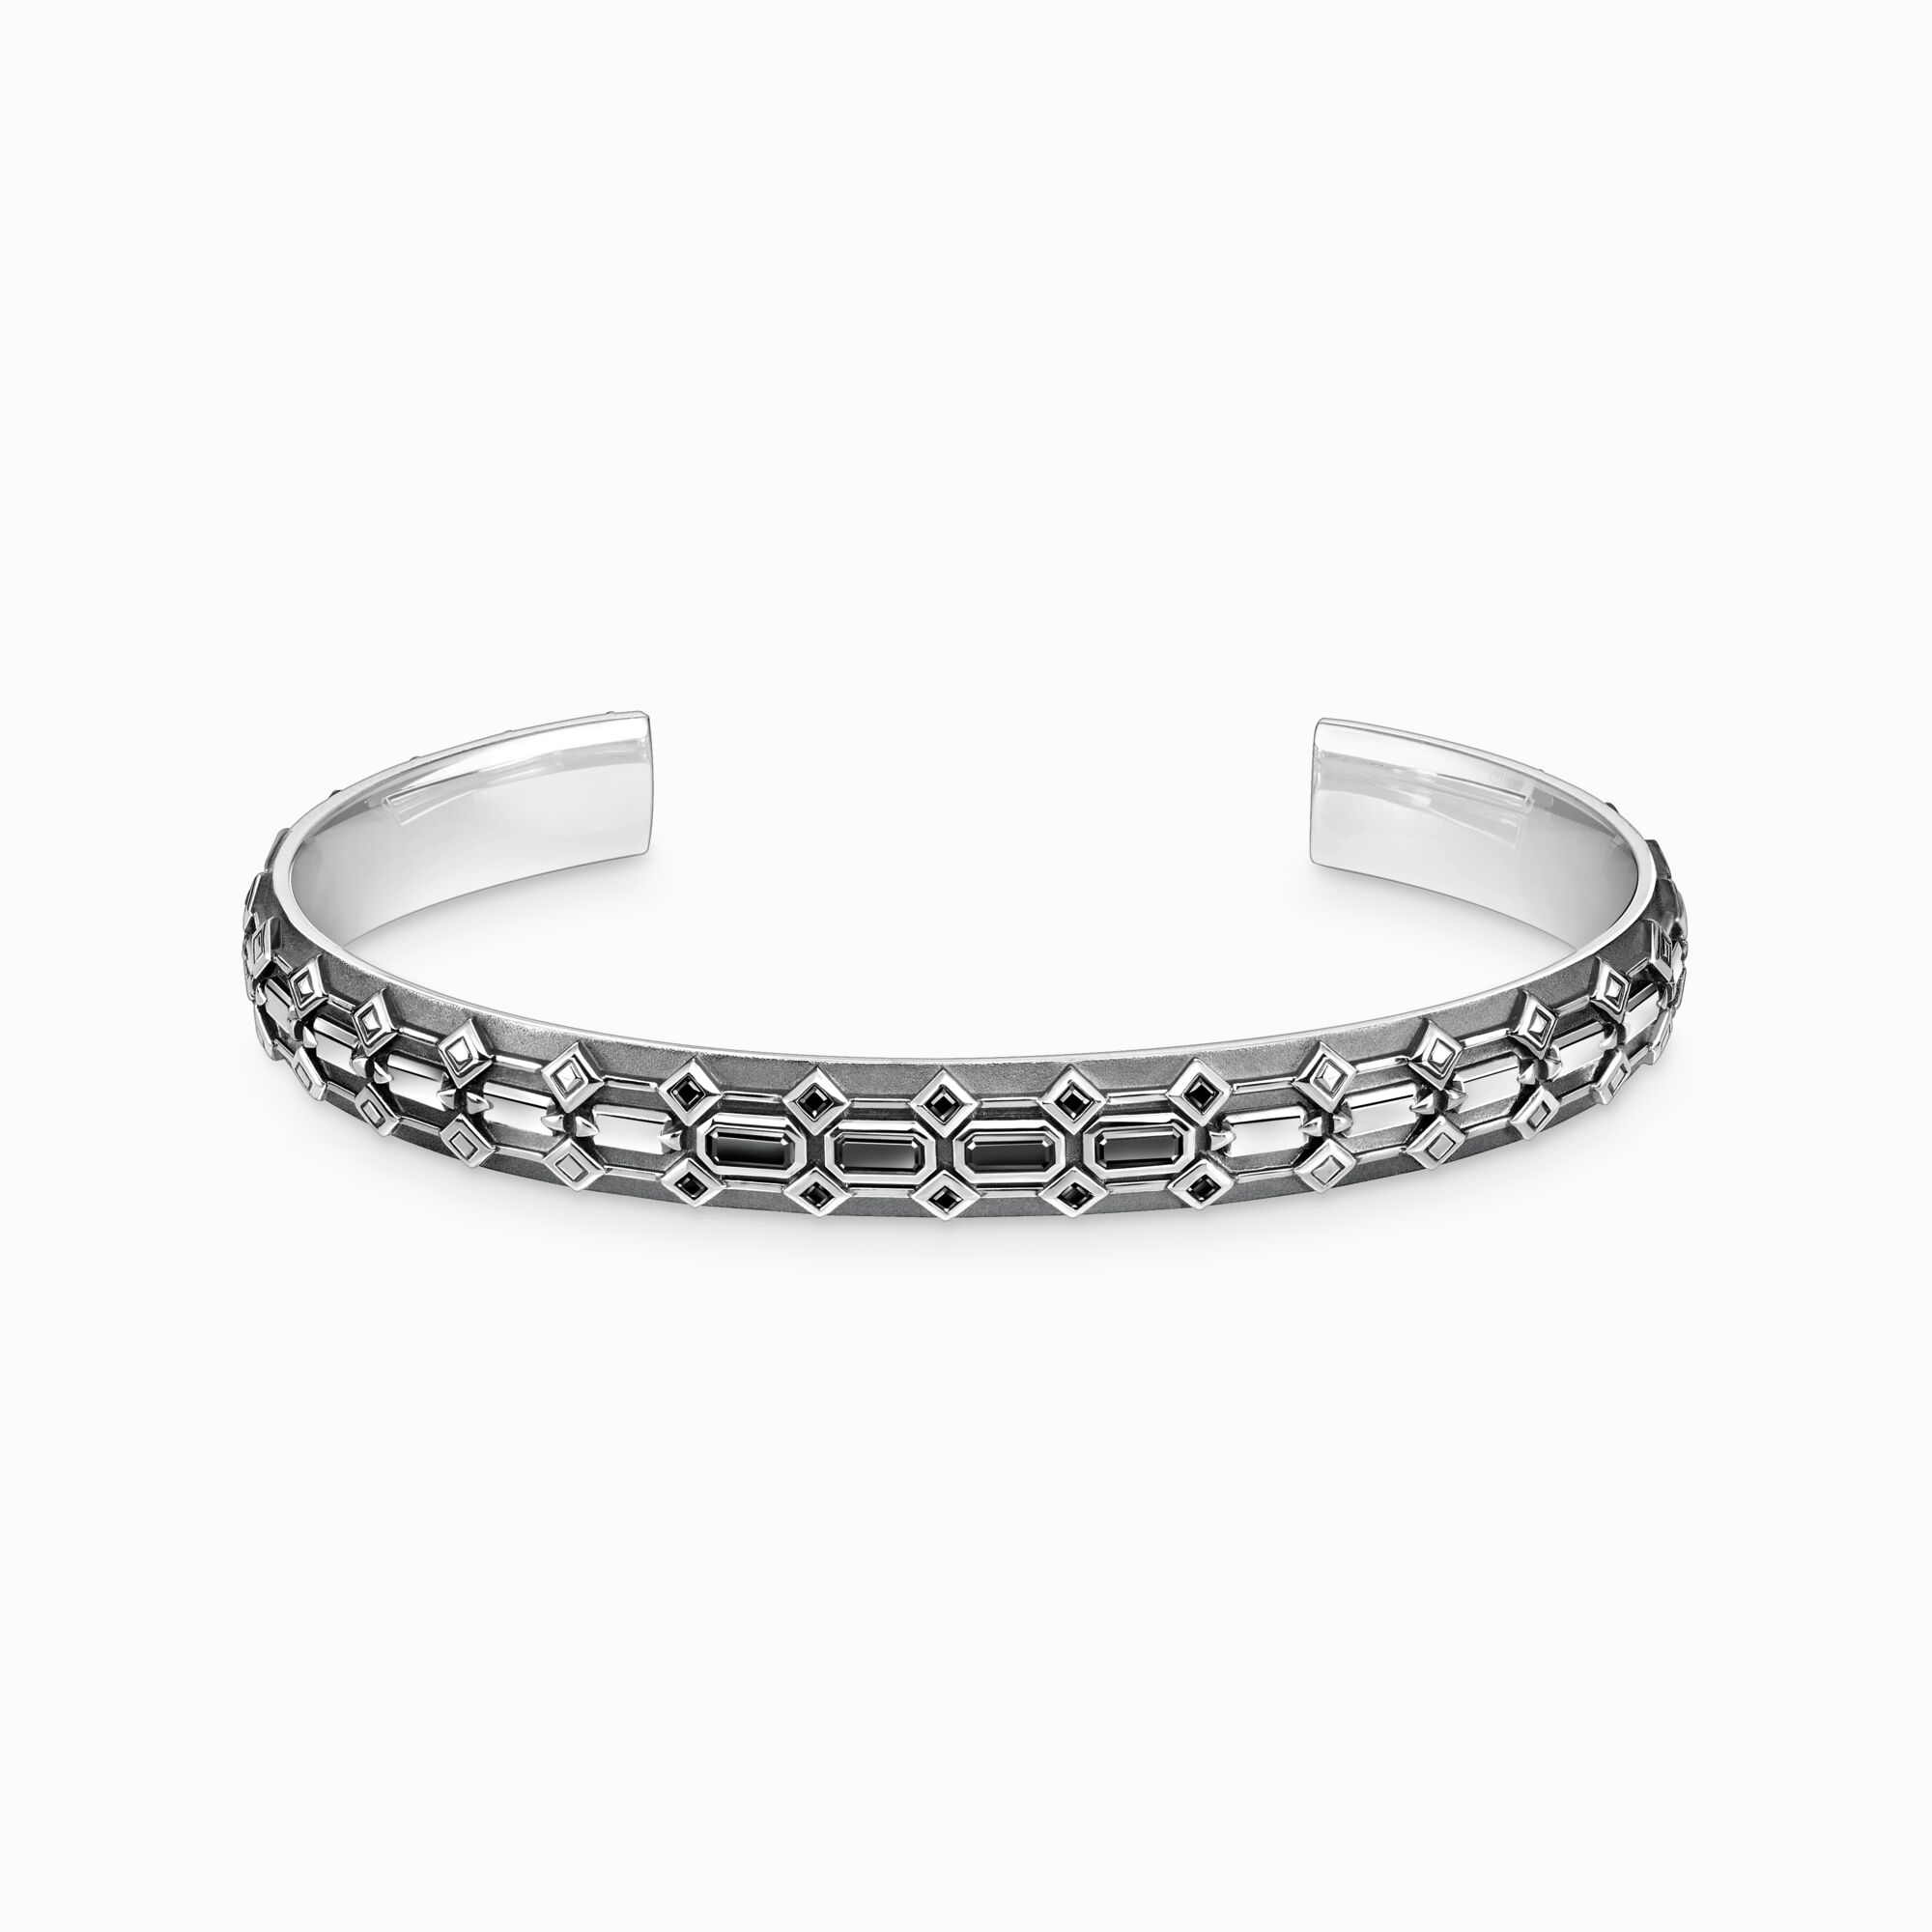 Blackened silver bangle crocodile shell with black stones from the  collection in the THOMAS SABO online store